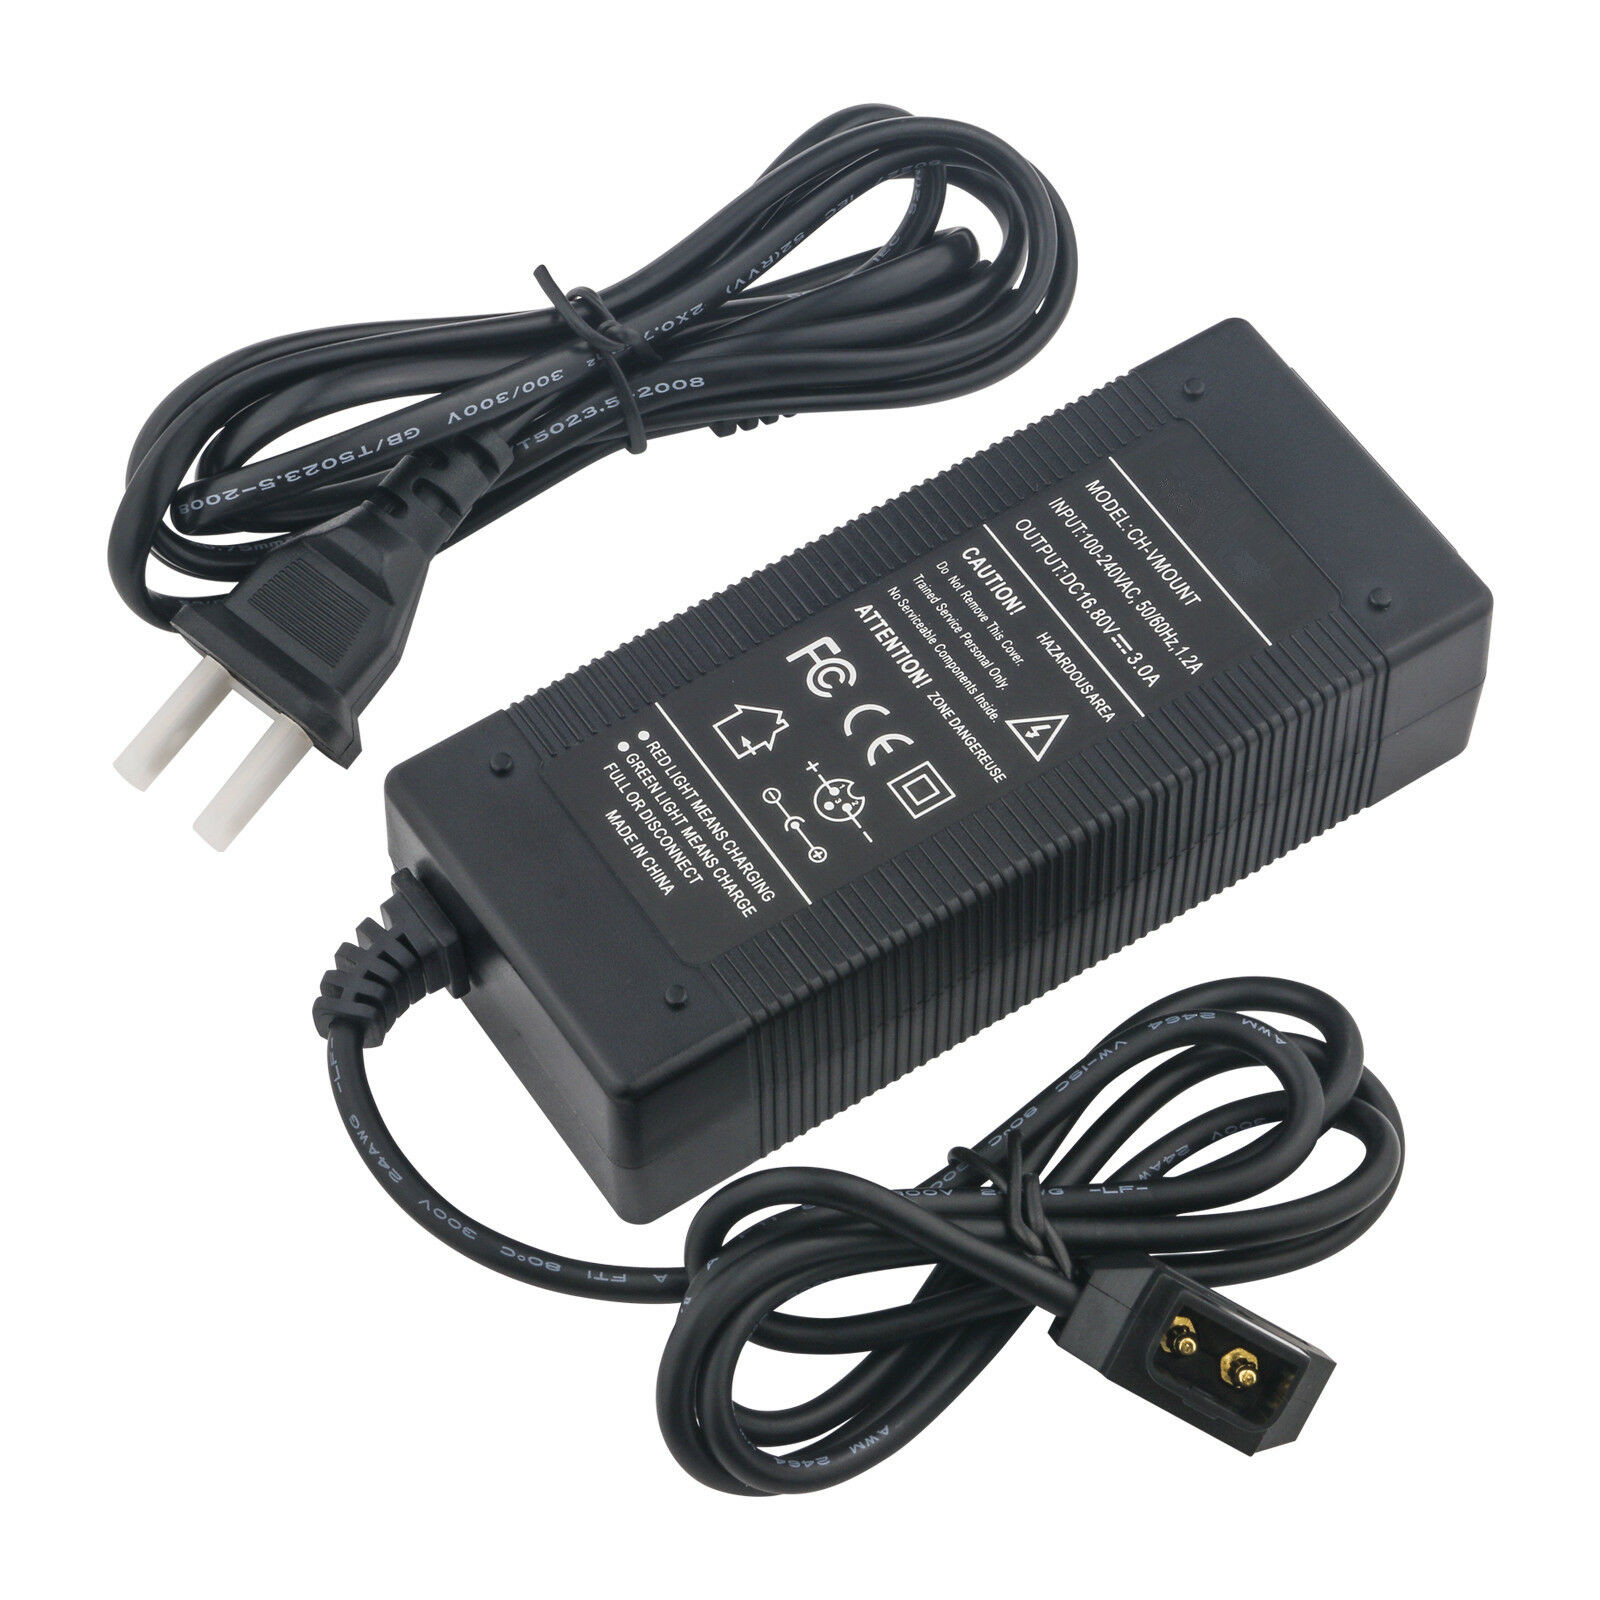 SONY BP-L60 battery charger